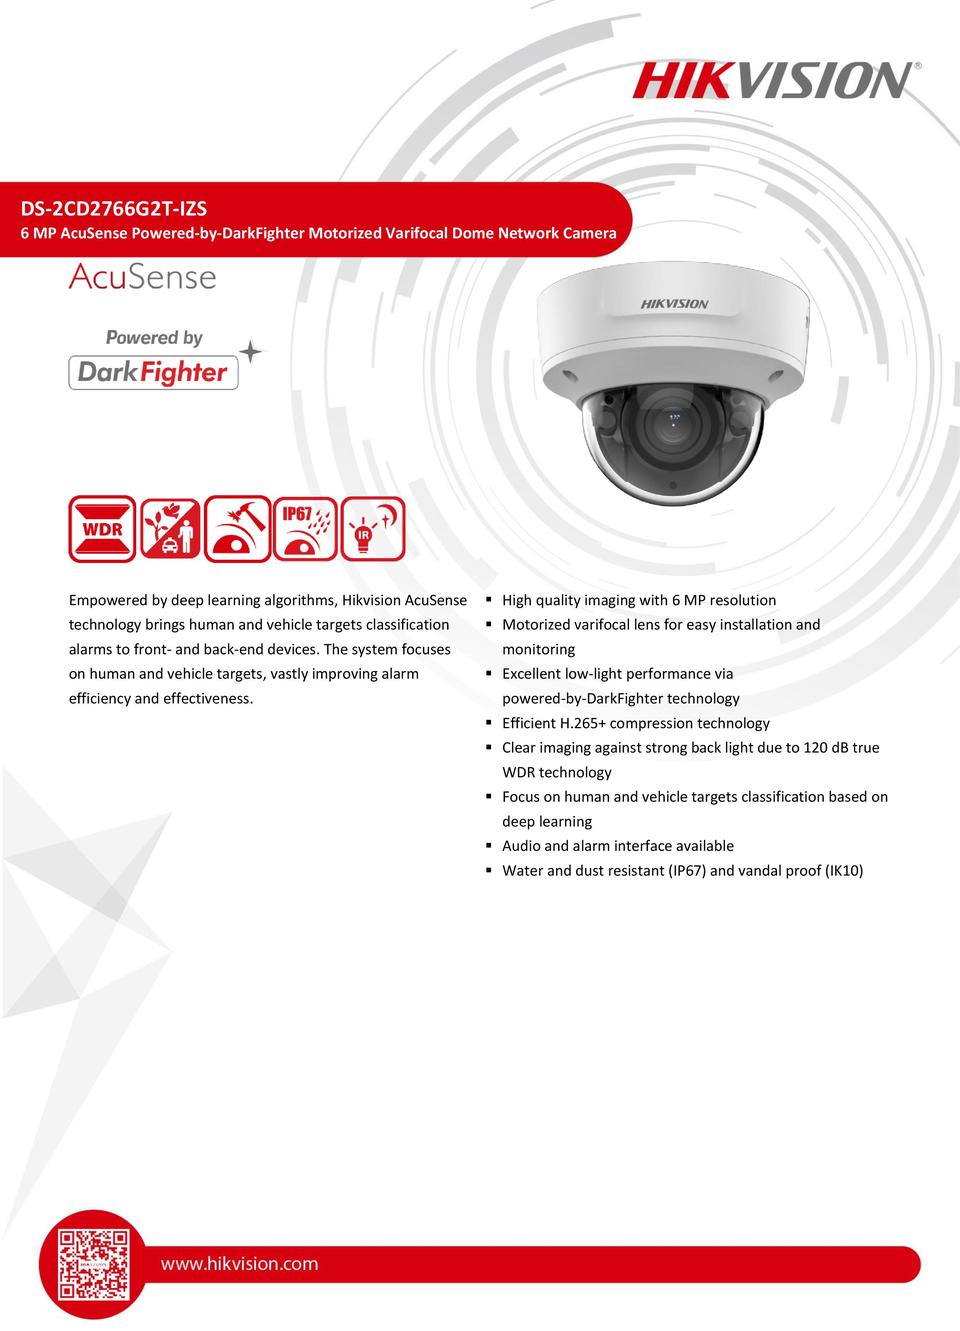 Hikvision DS-2CD2766G2T-IZS 6MP Gen2 Acusense IP Outdoor Dome Camera With 2.8-12mm Motorised Lens 0